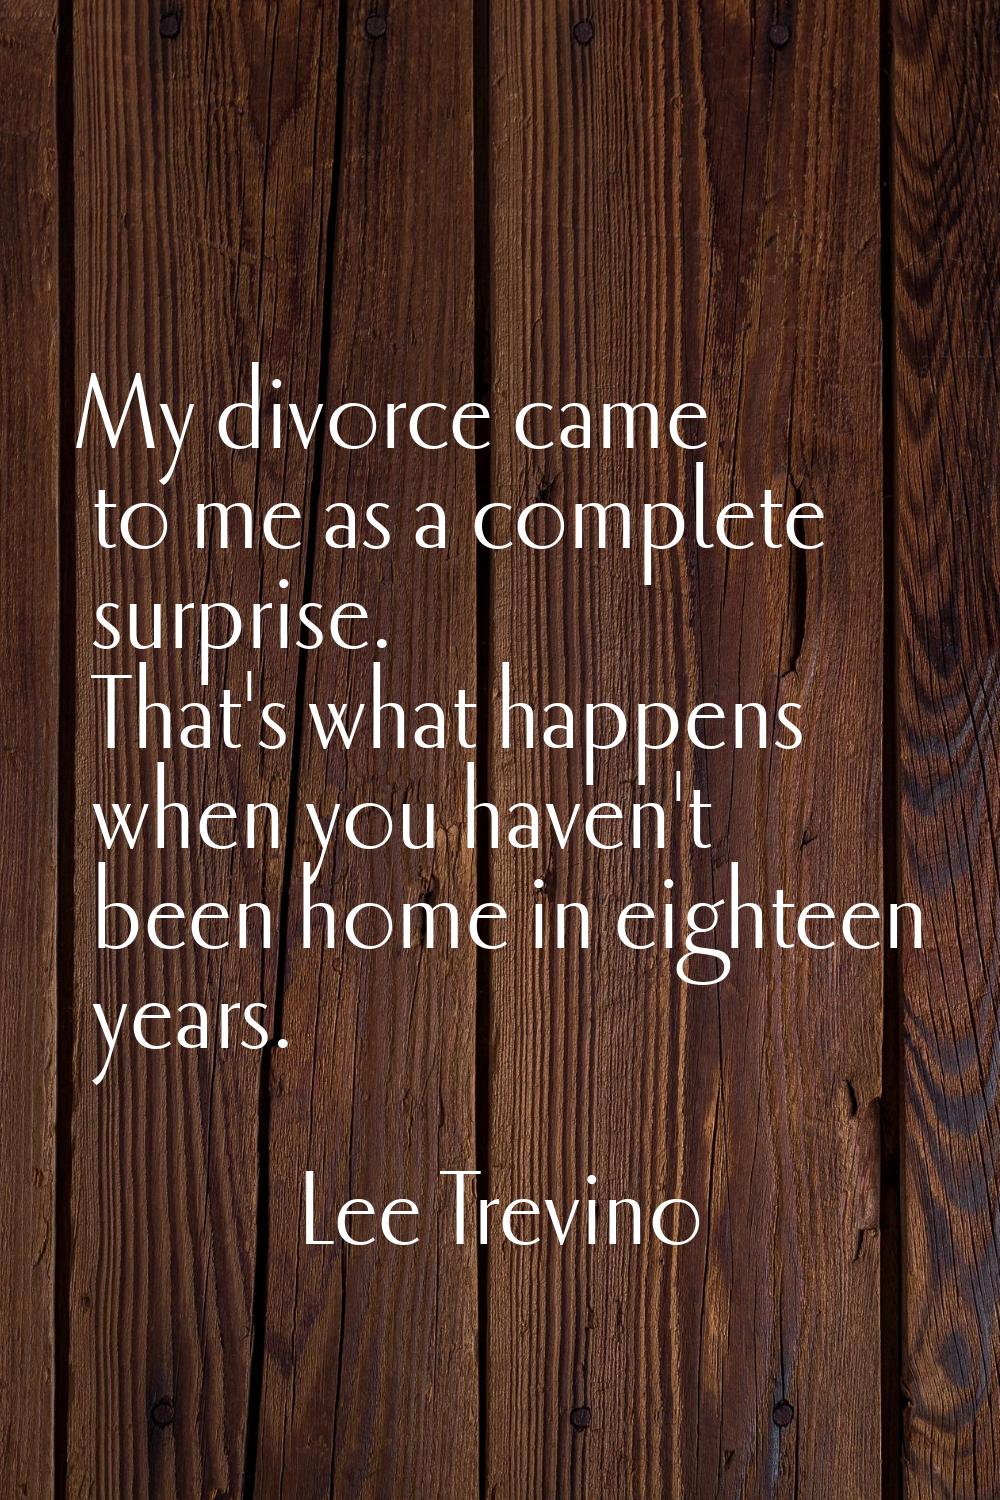 My divorce came to me as a complete surprise. That's what happens when you haven't been home in eig